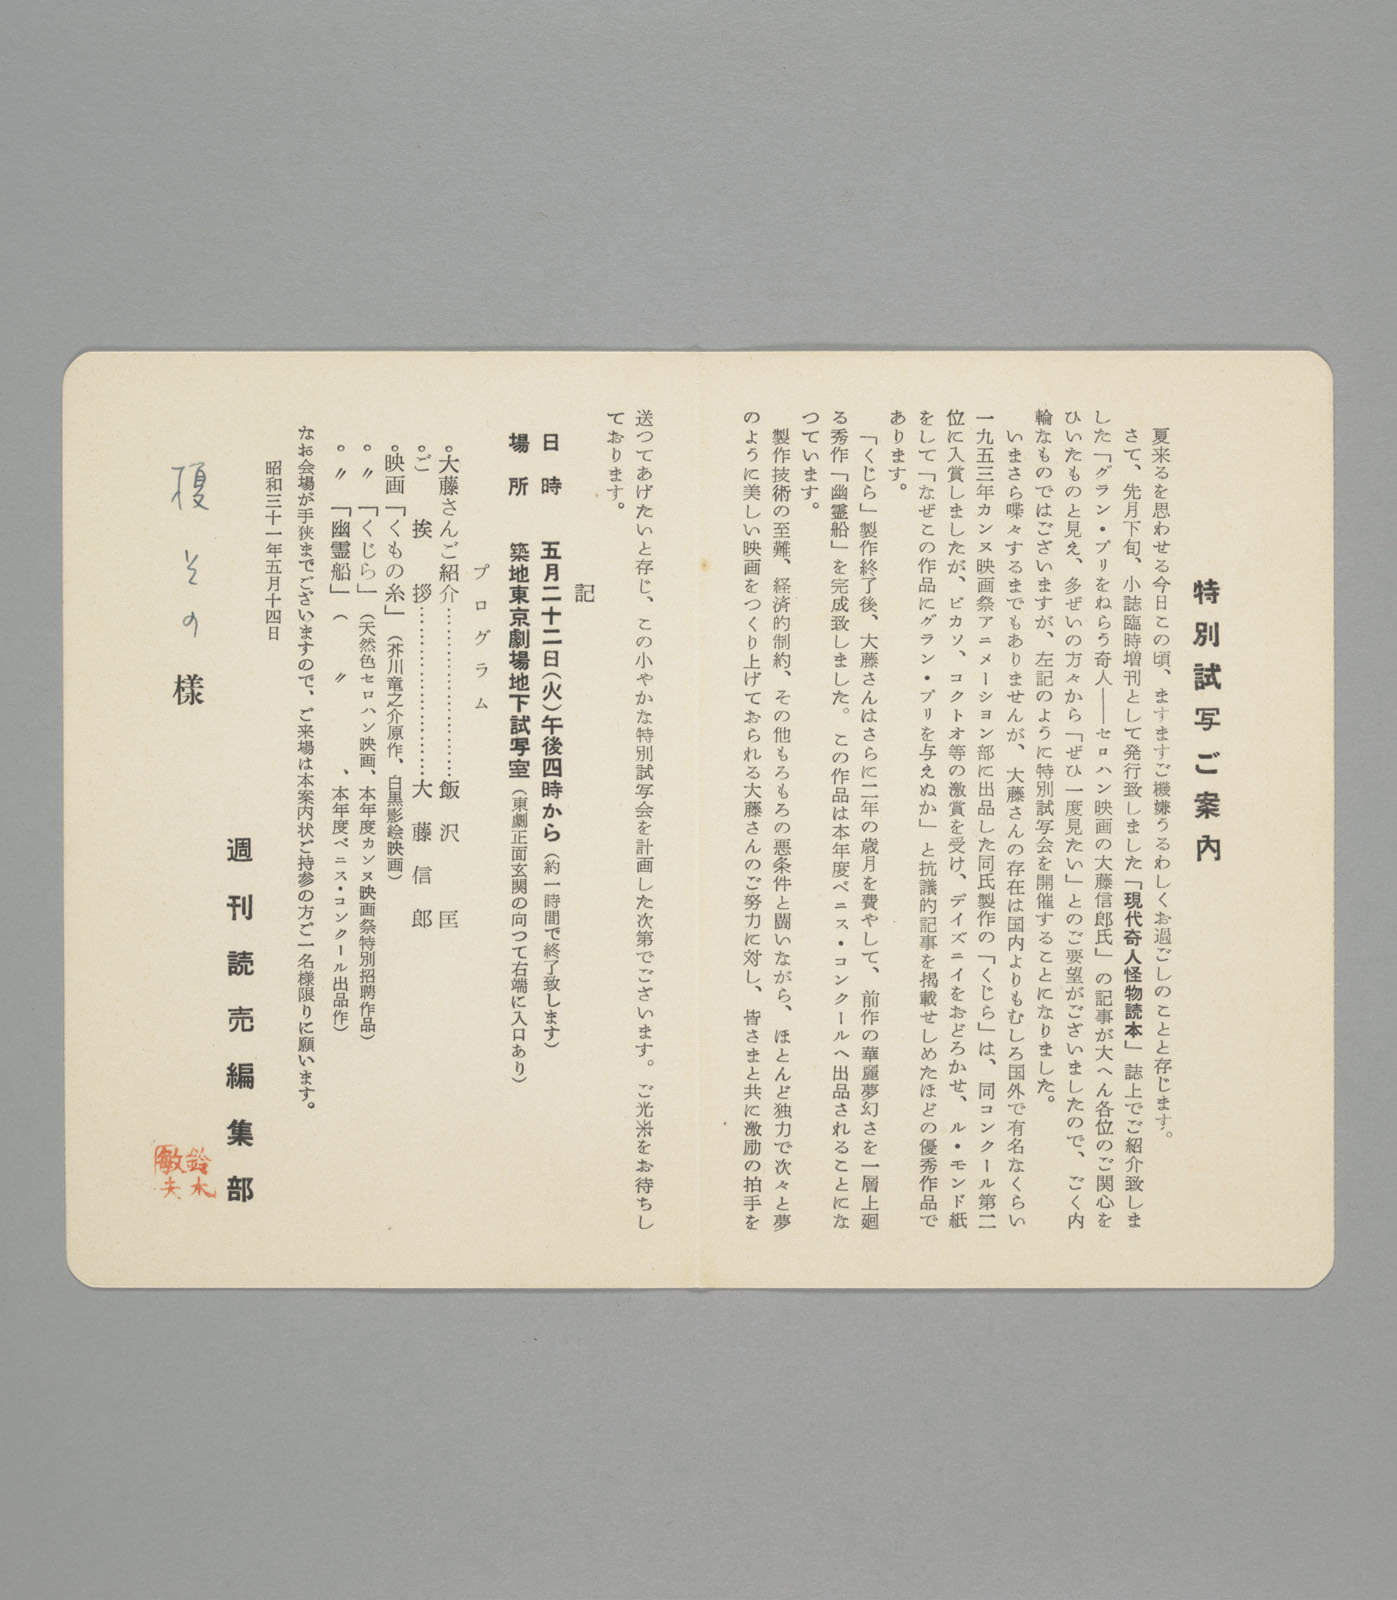 Invitation card for a special screening of Ofuji's works (1956)